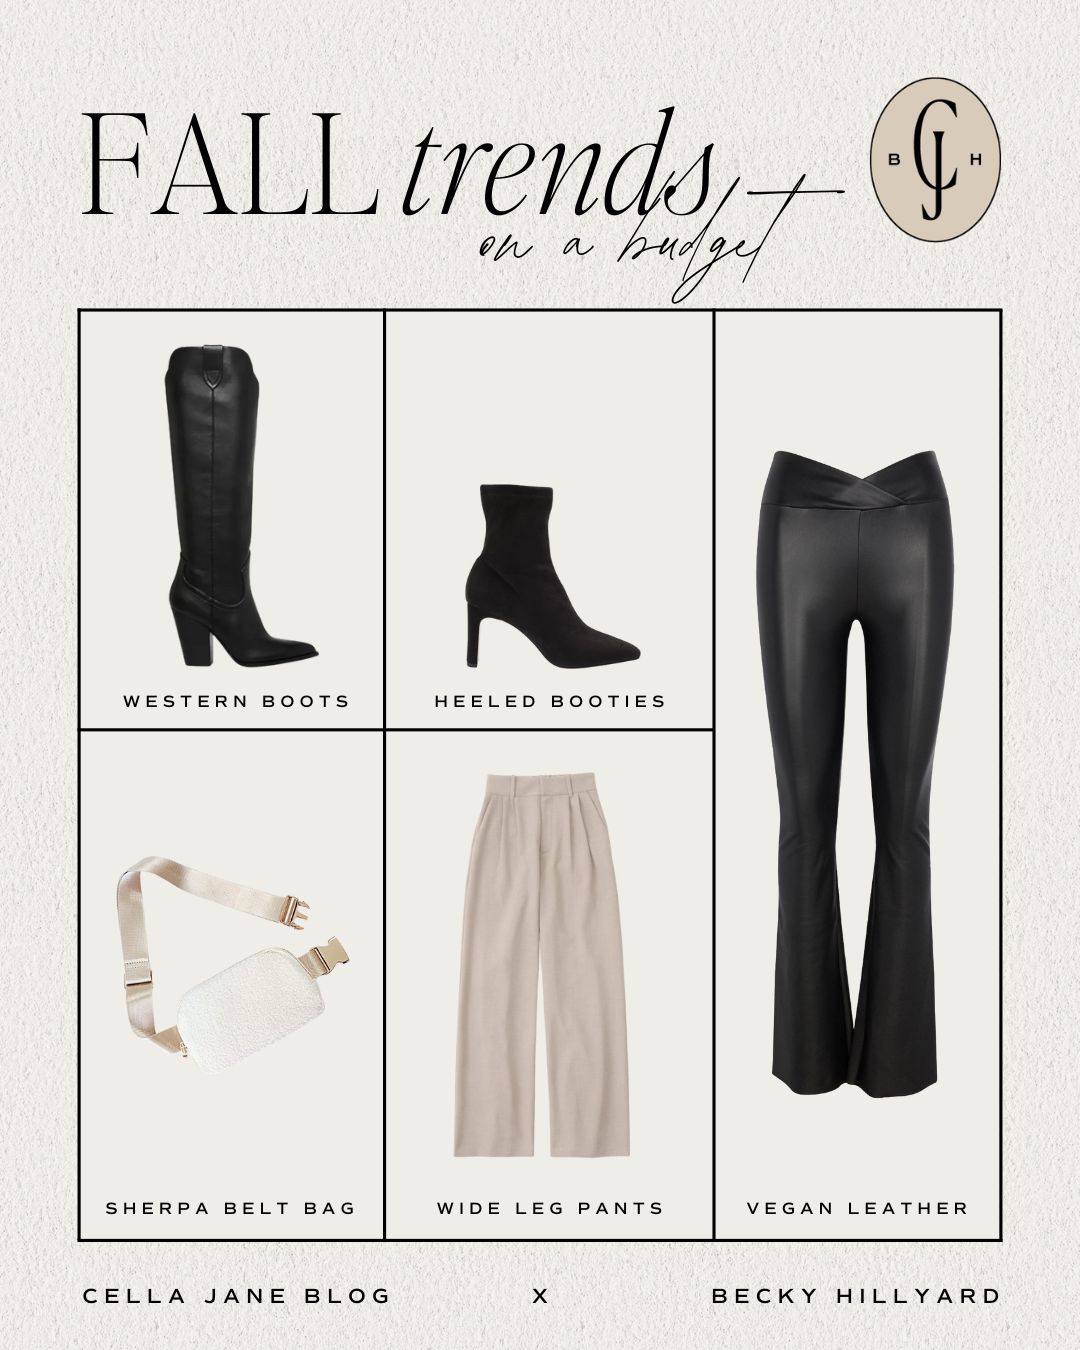 Cella Jane - Today on the blog I am sharing 5 Fall Staples with